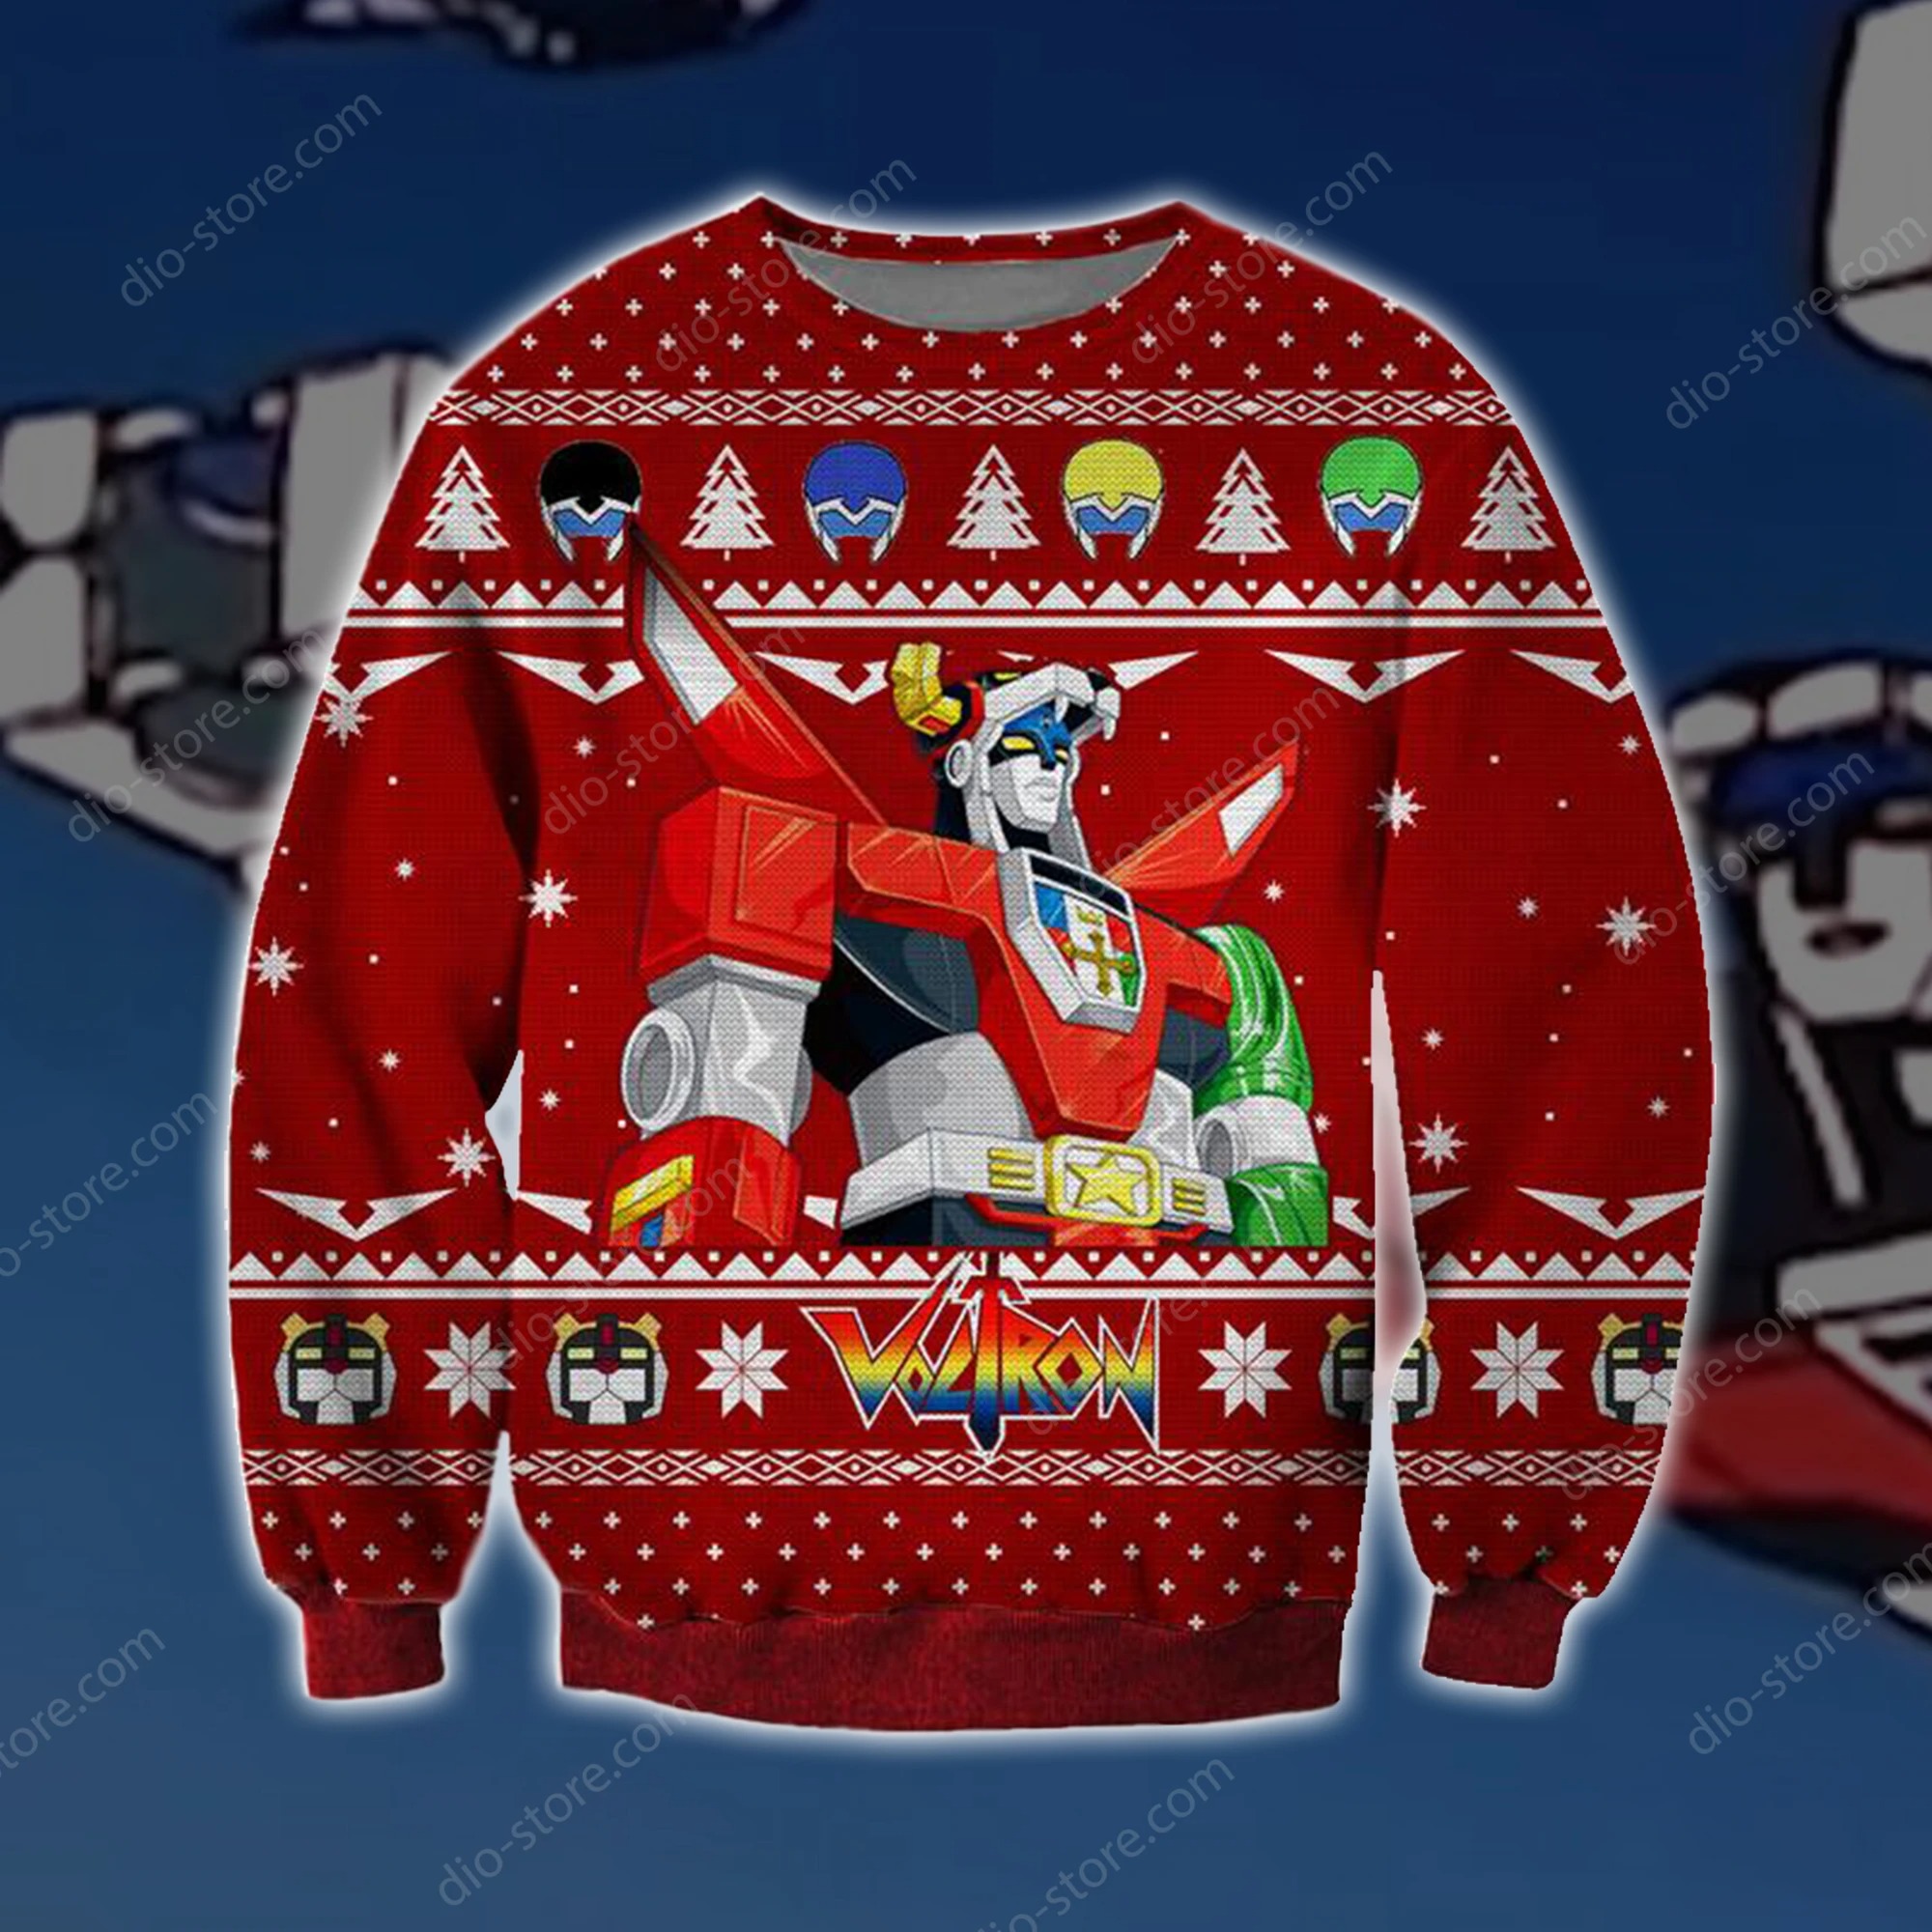 VOLTRON KNITTING PATTERN UGLY SWEATER